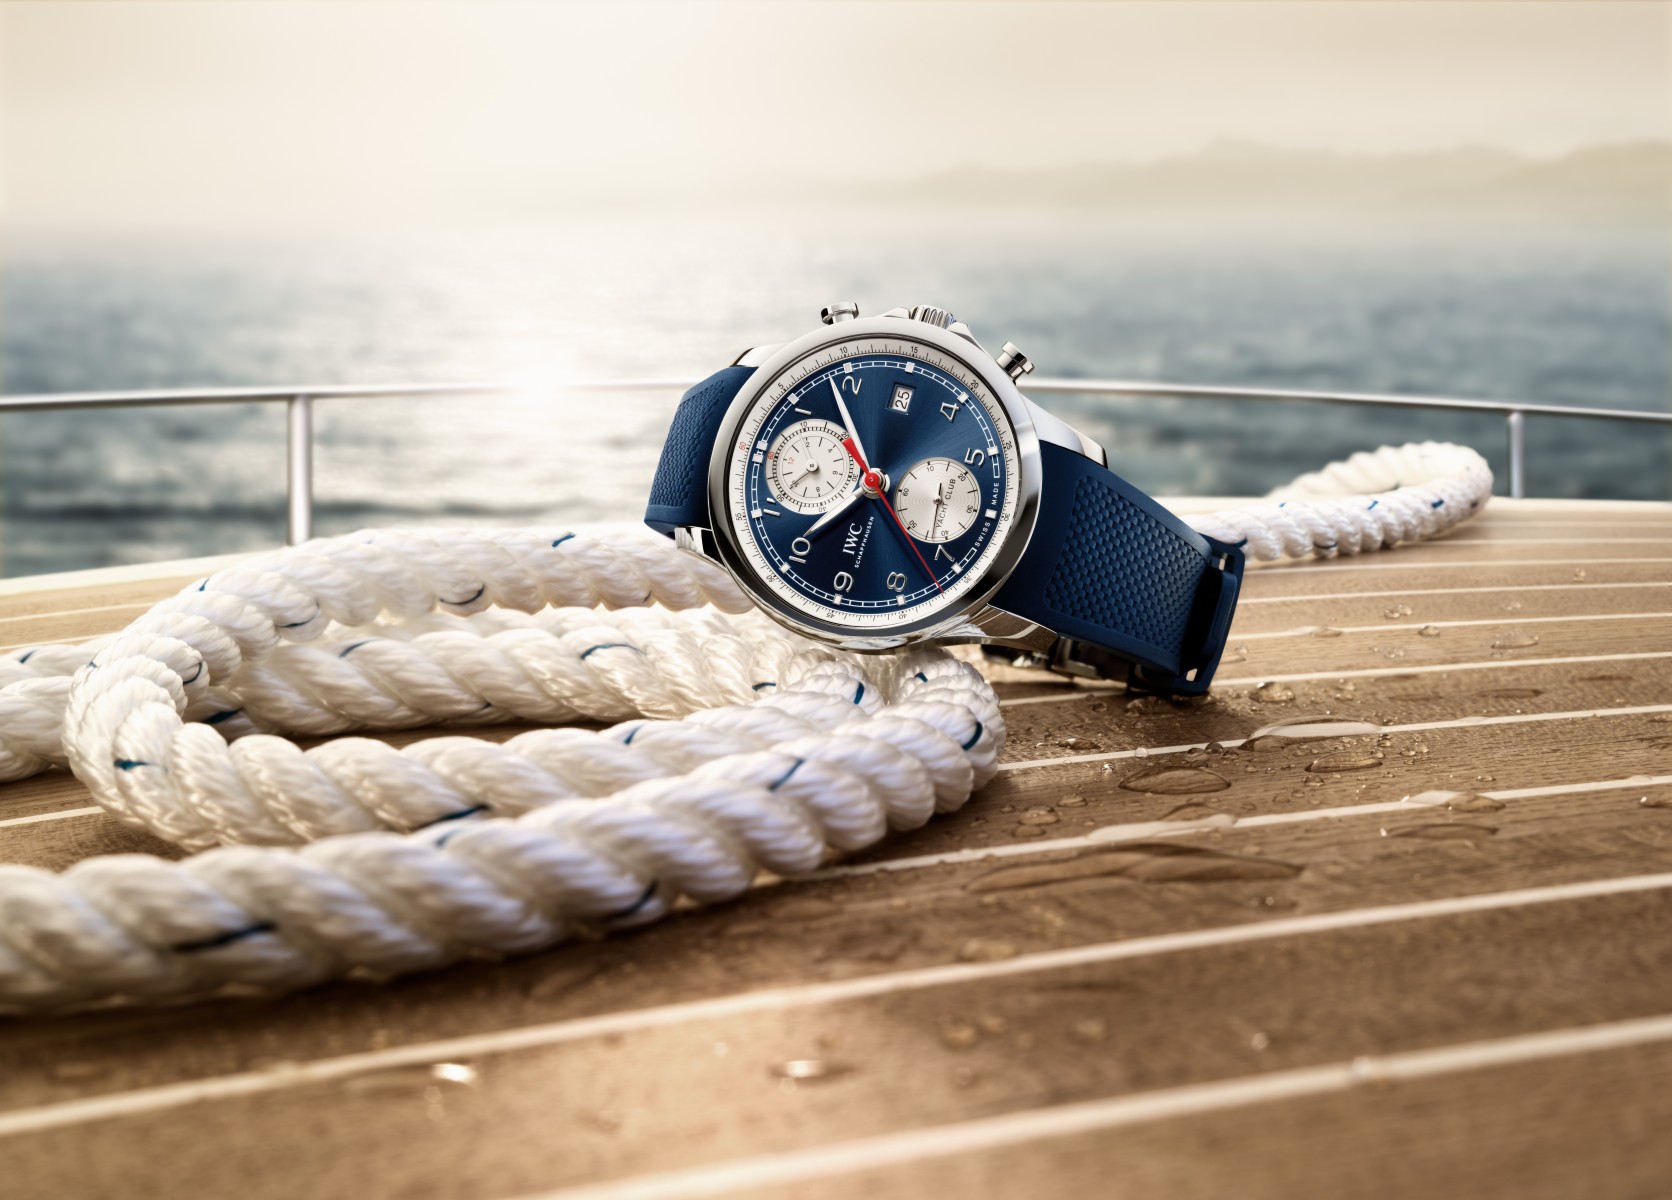 Portugieser Yacht Club Chronograph (Ref. IW390507) on the ropes